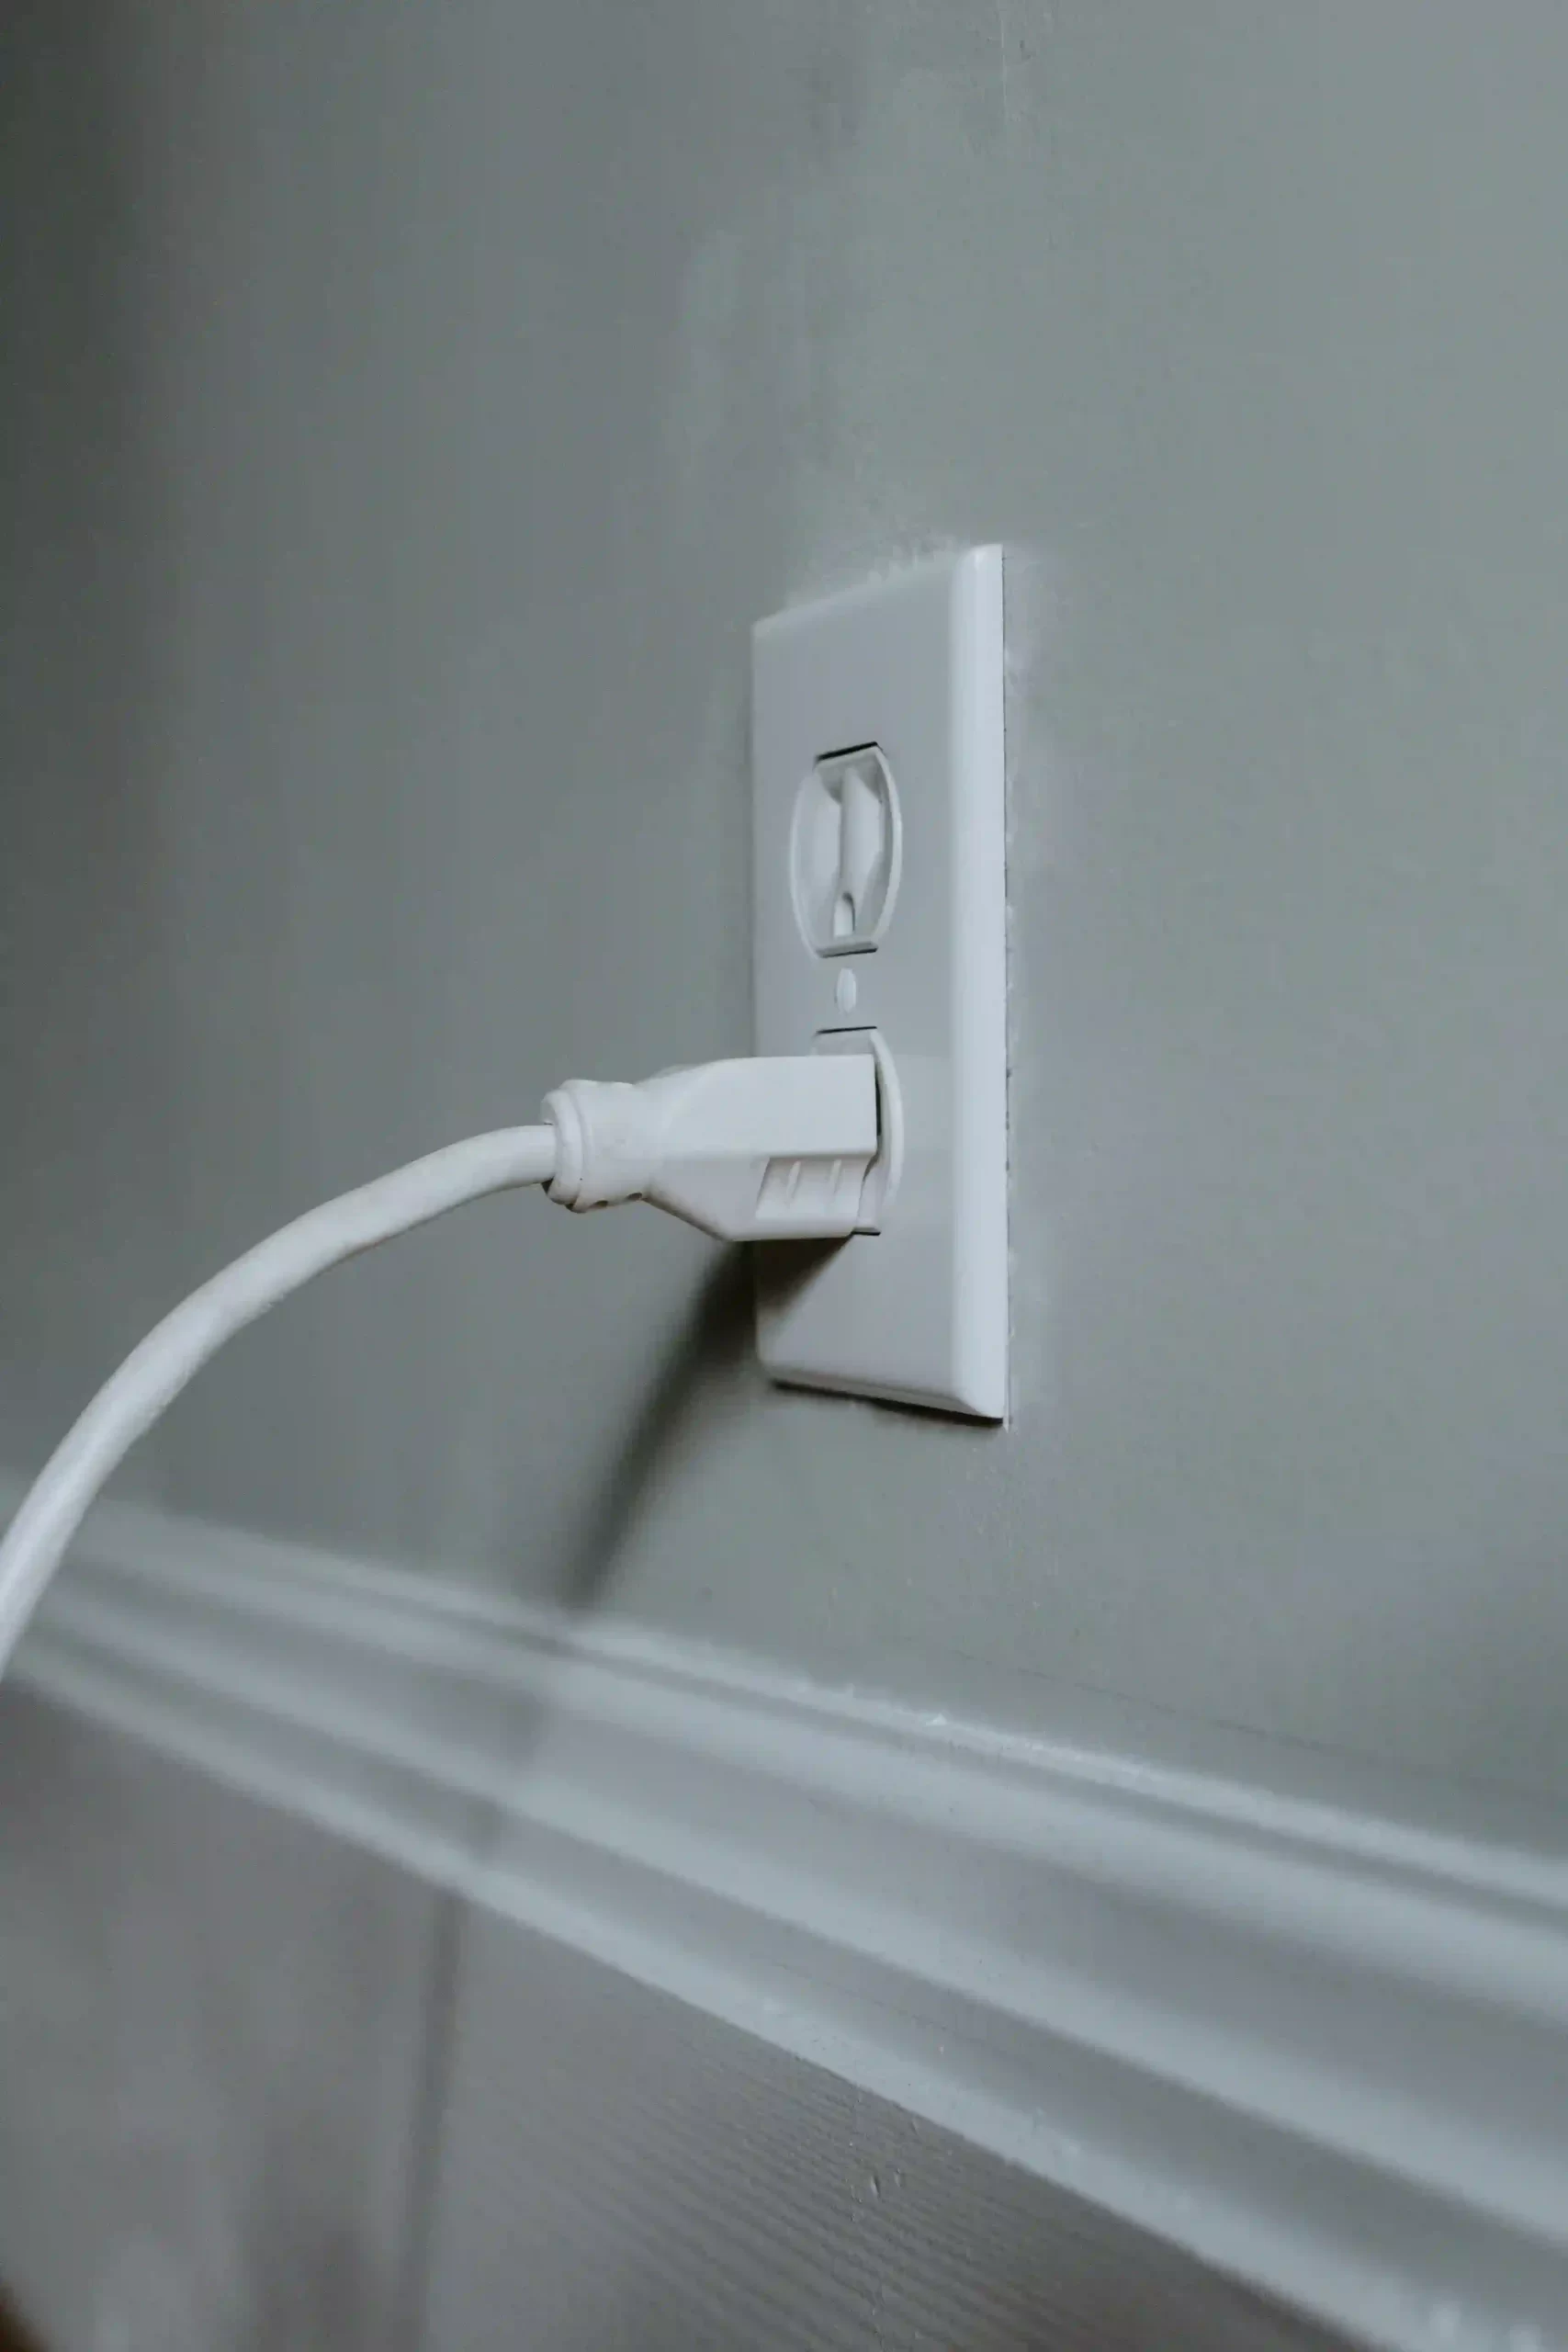 Plug your Element TV into different Power Outlet